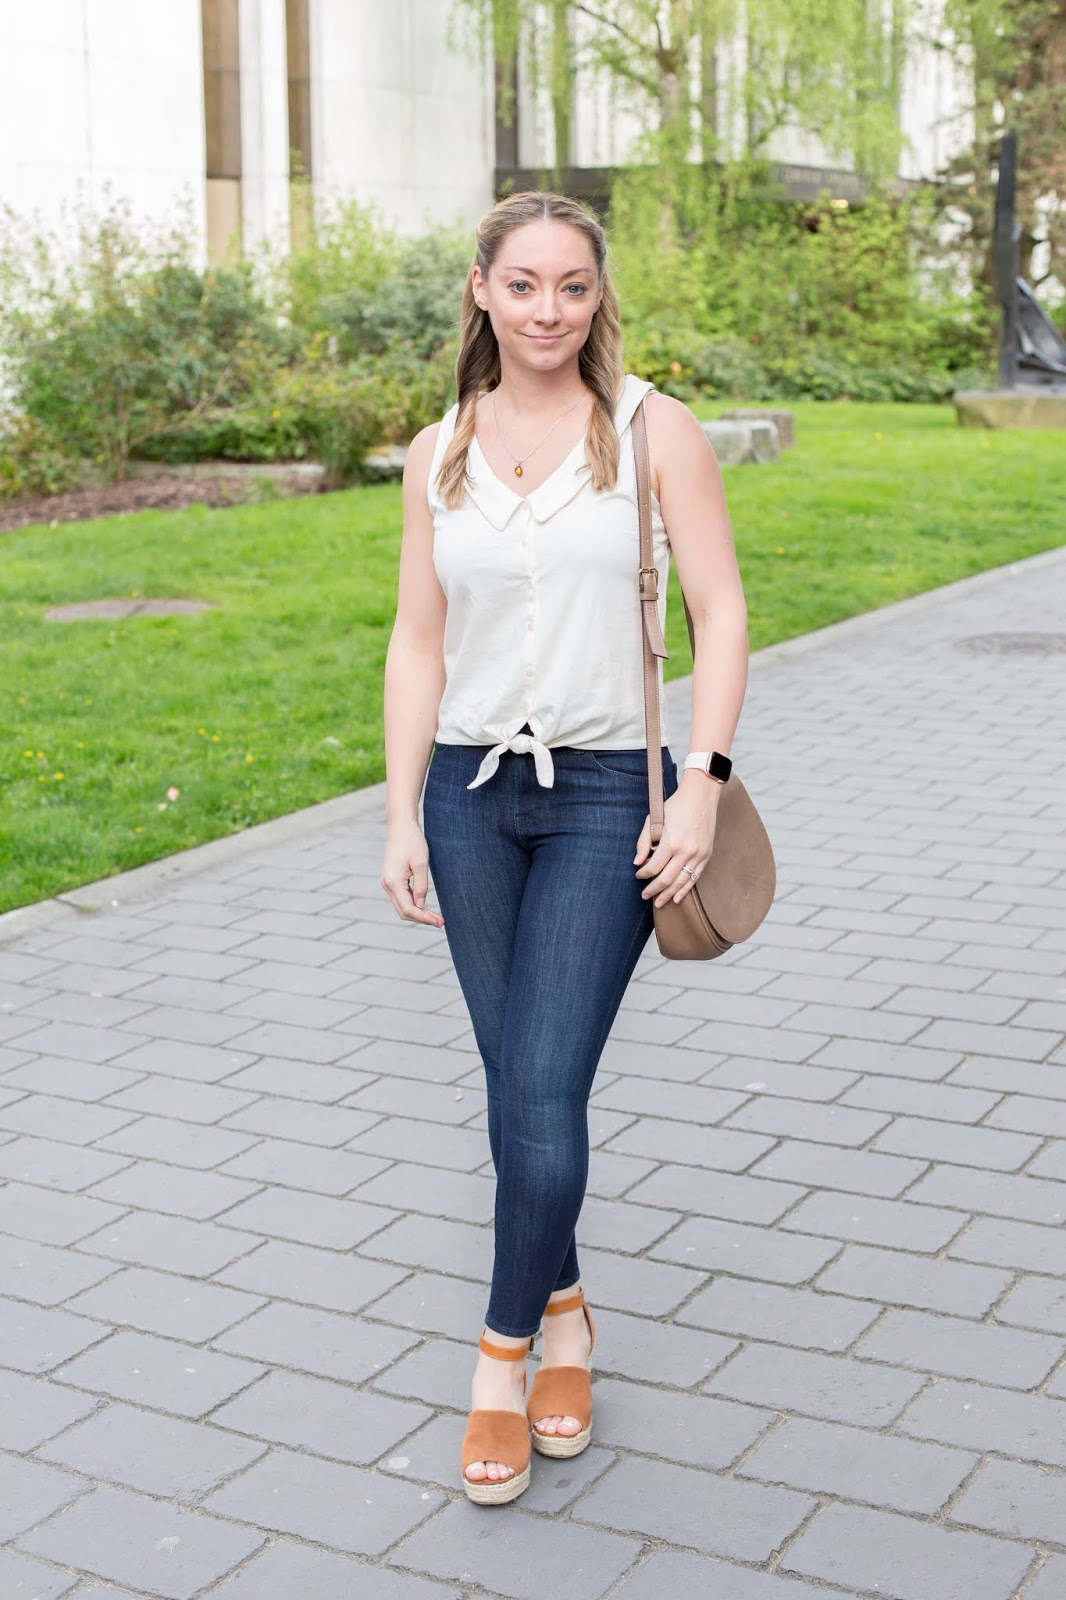 Spring Style: Espadrille Wedges + Tie-Front Shirt